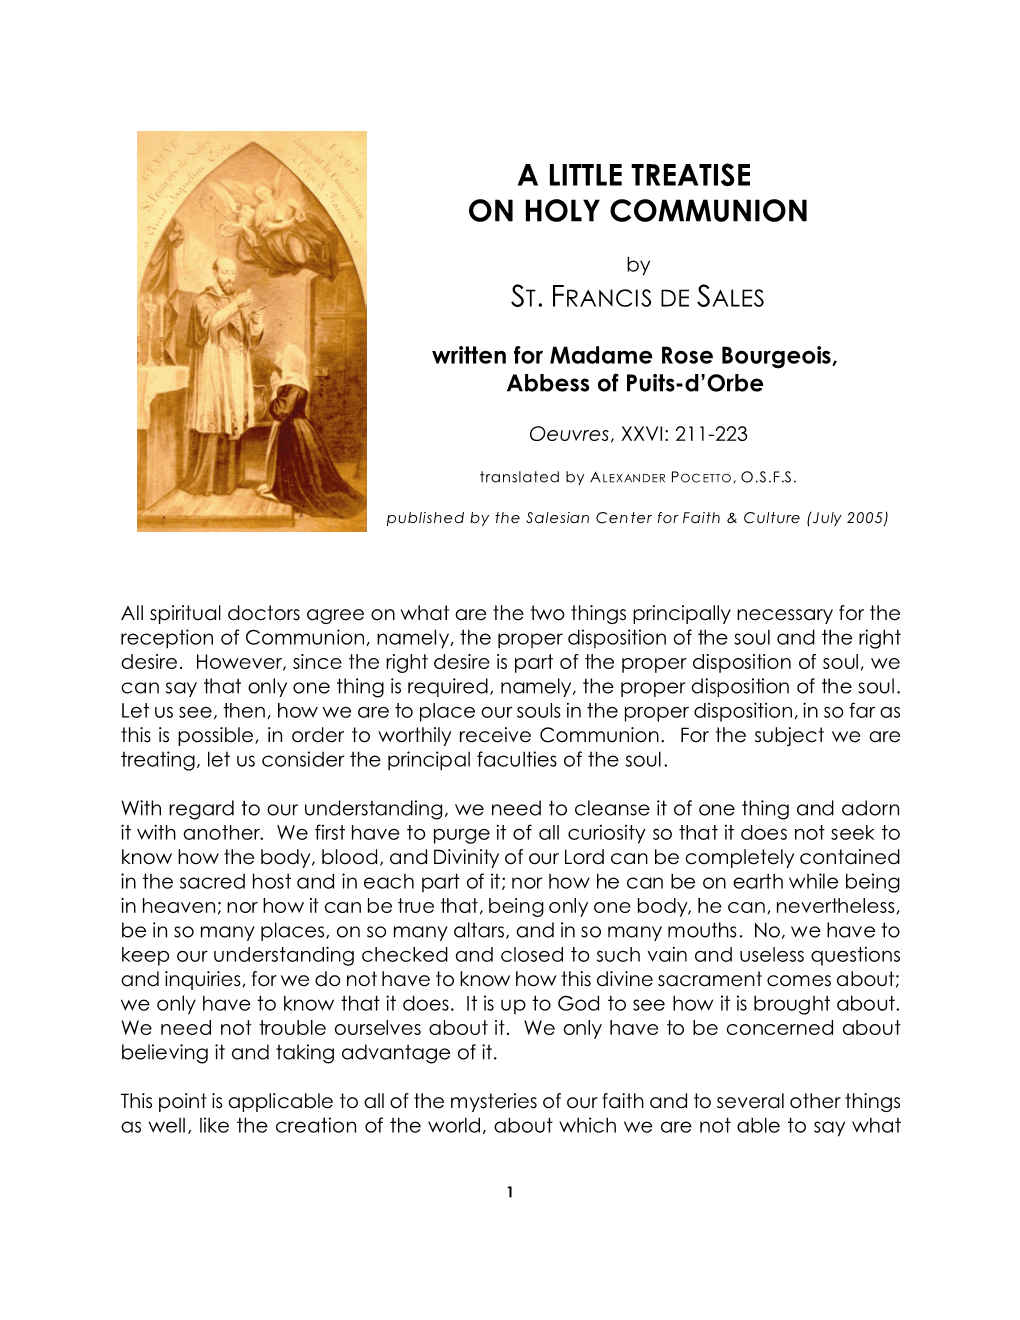 A Little Treatise on Holy Communion